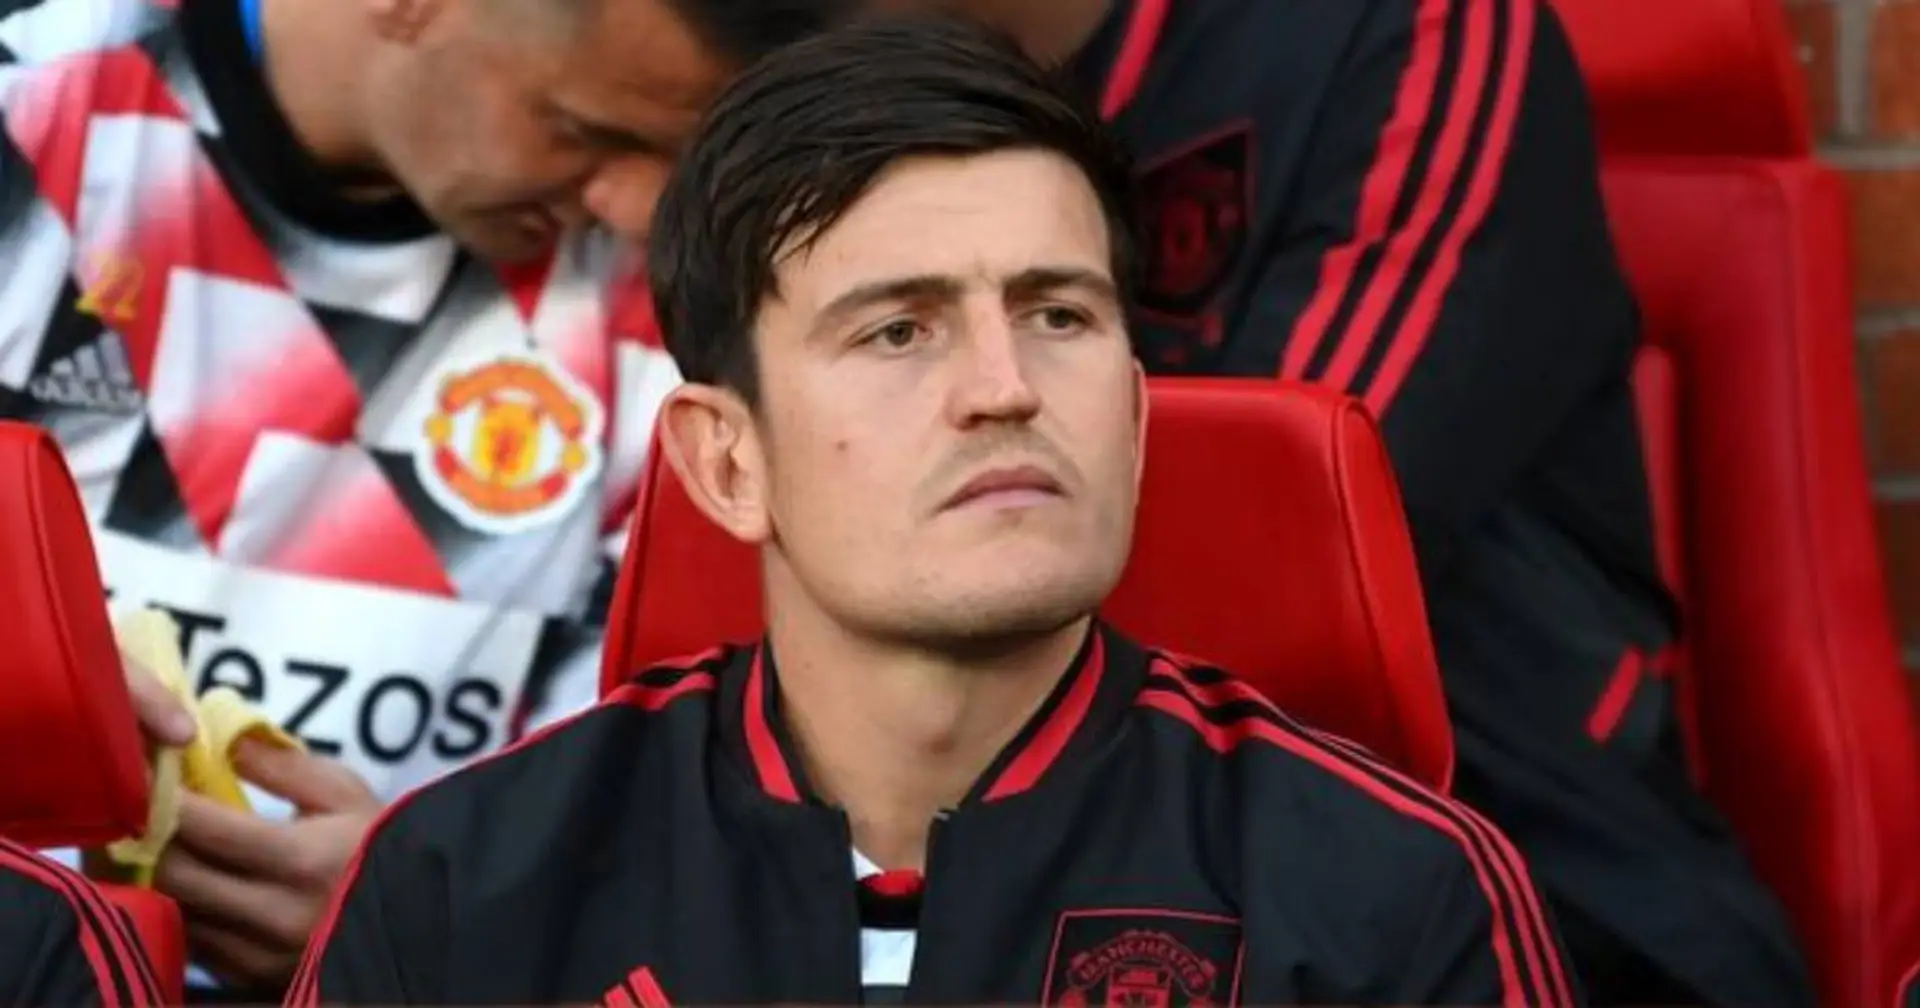 Maguire 'focuses too much' on social media criticism, advised to stay off it after games